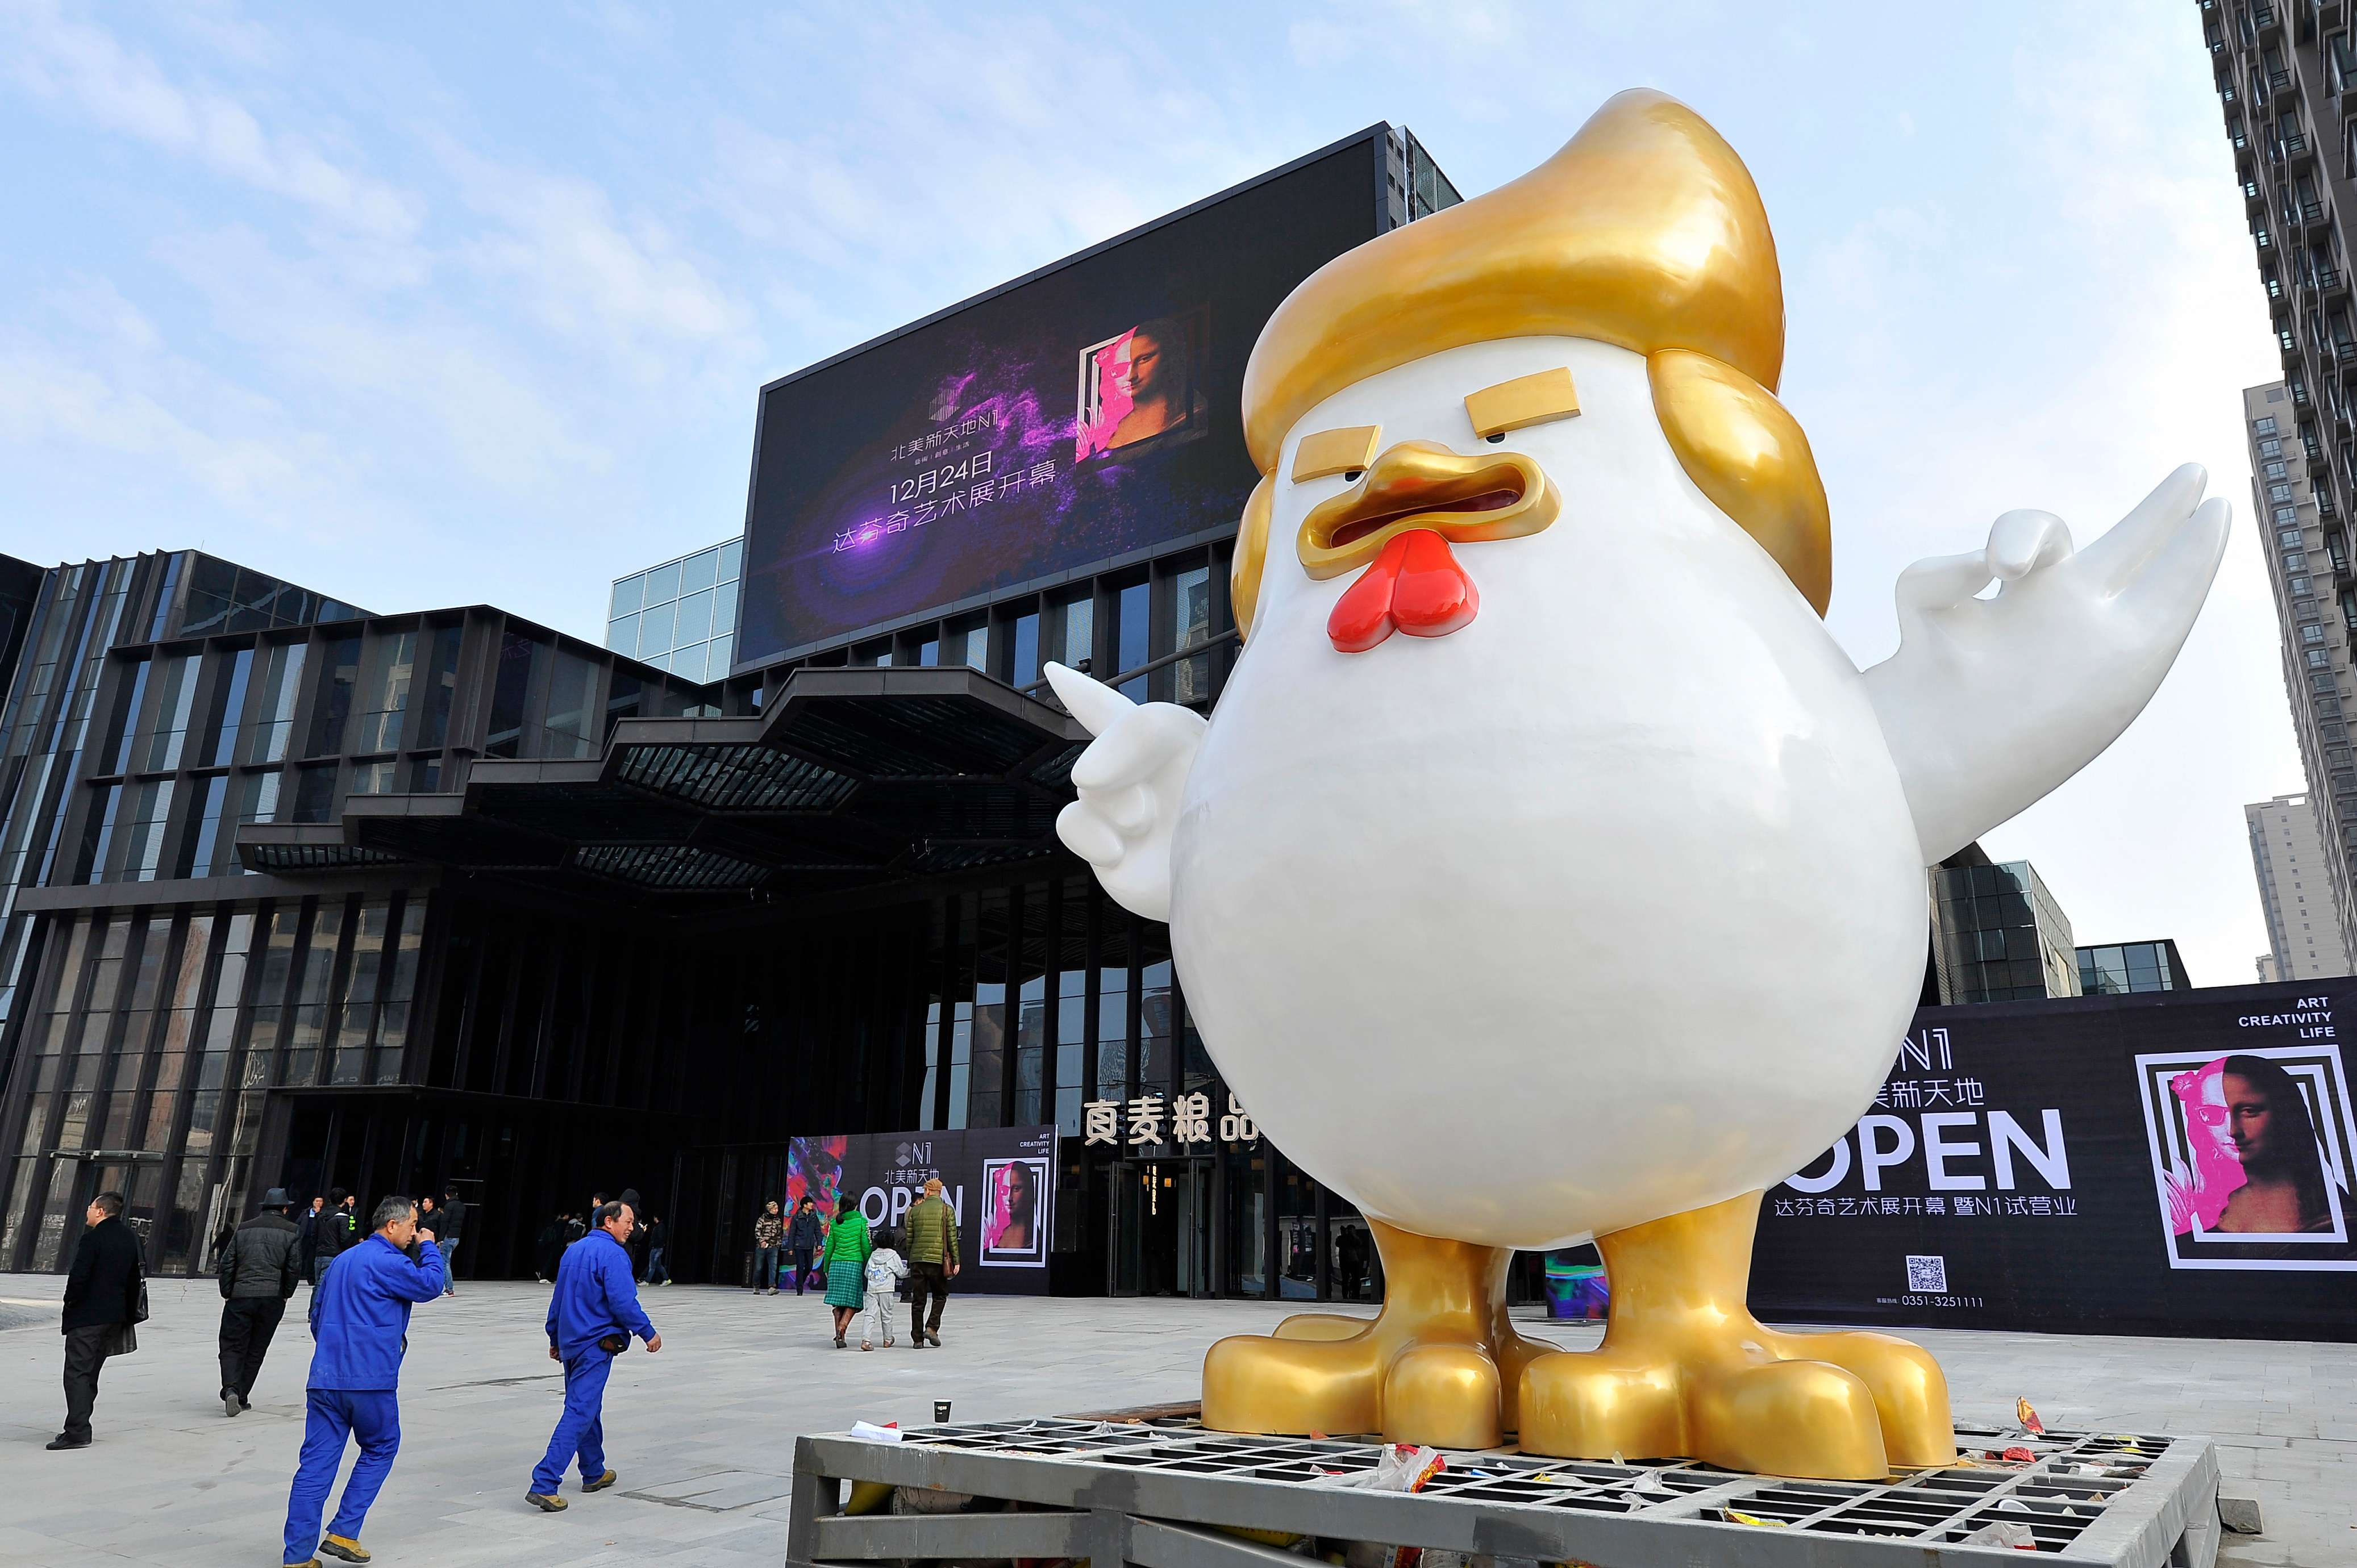 A giant rooster sculpture – said to resemble US President-elect Donald Trump – at a shopping mall in Taiyuan, north China's Shanxi province. Photo: AFP